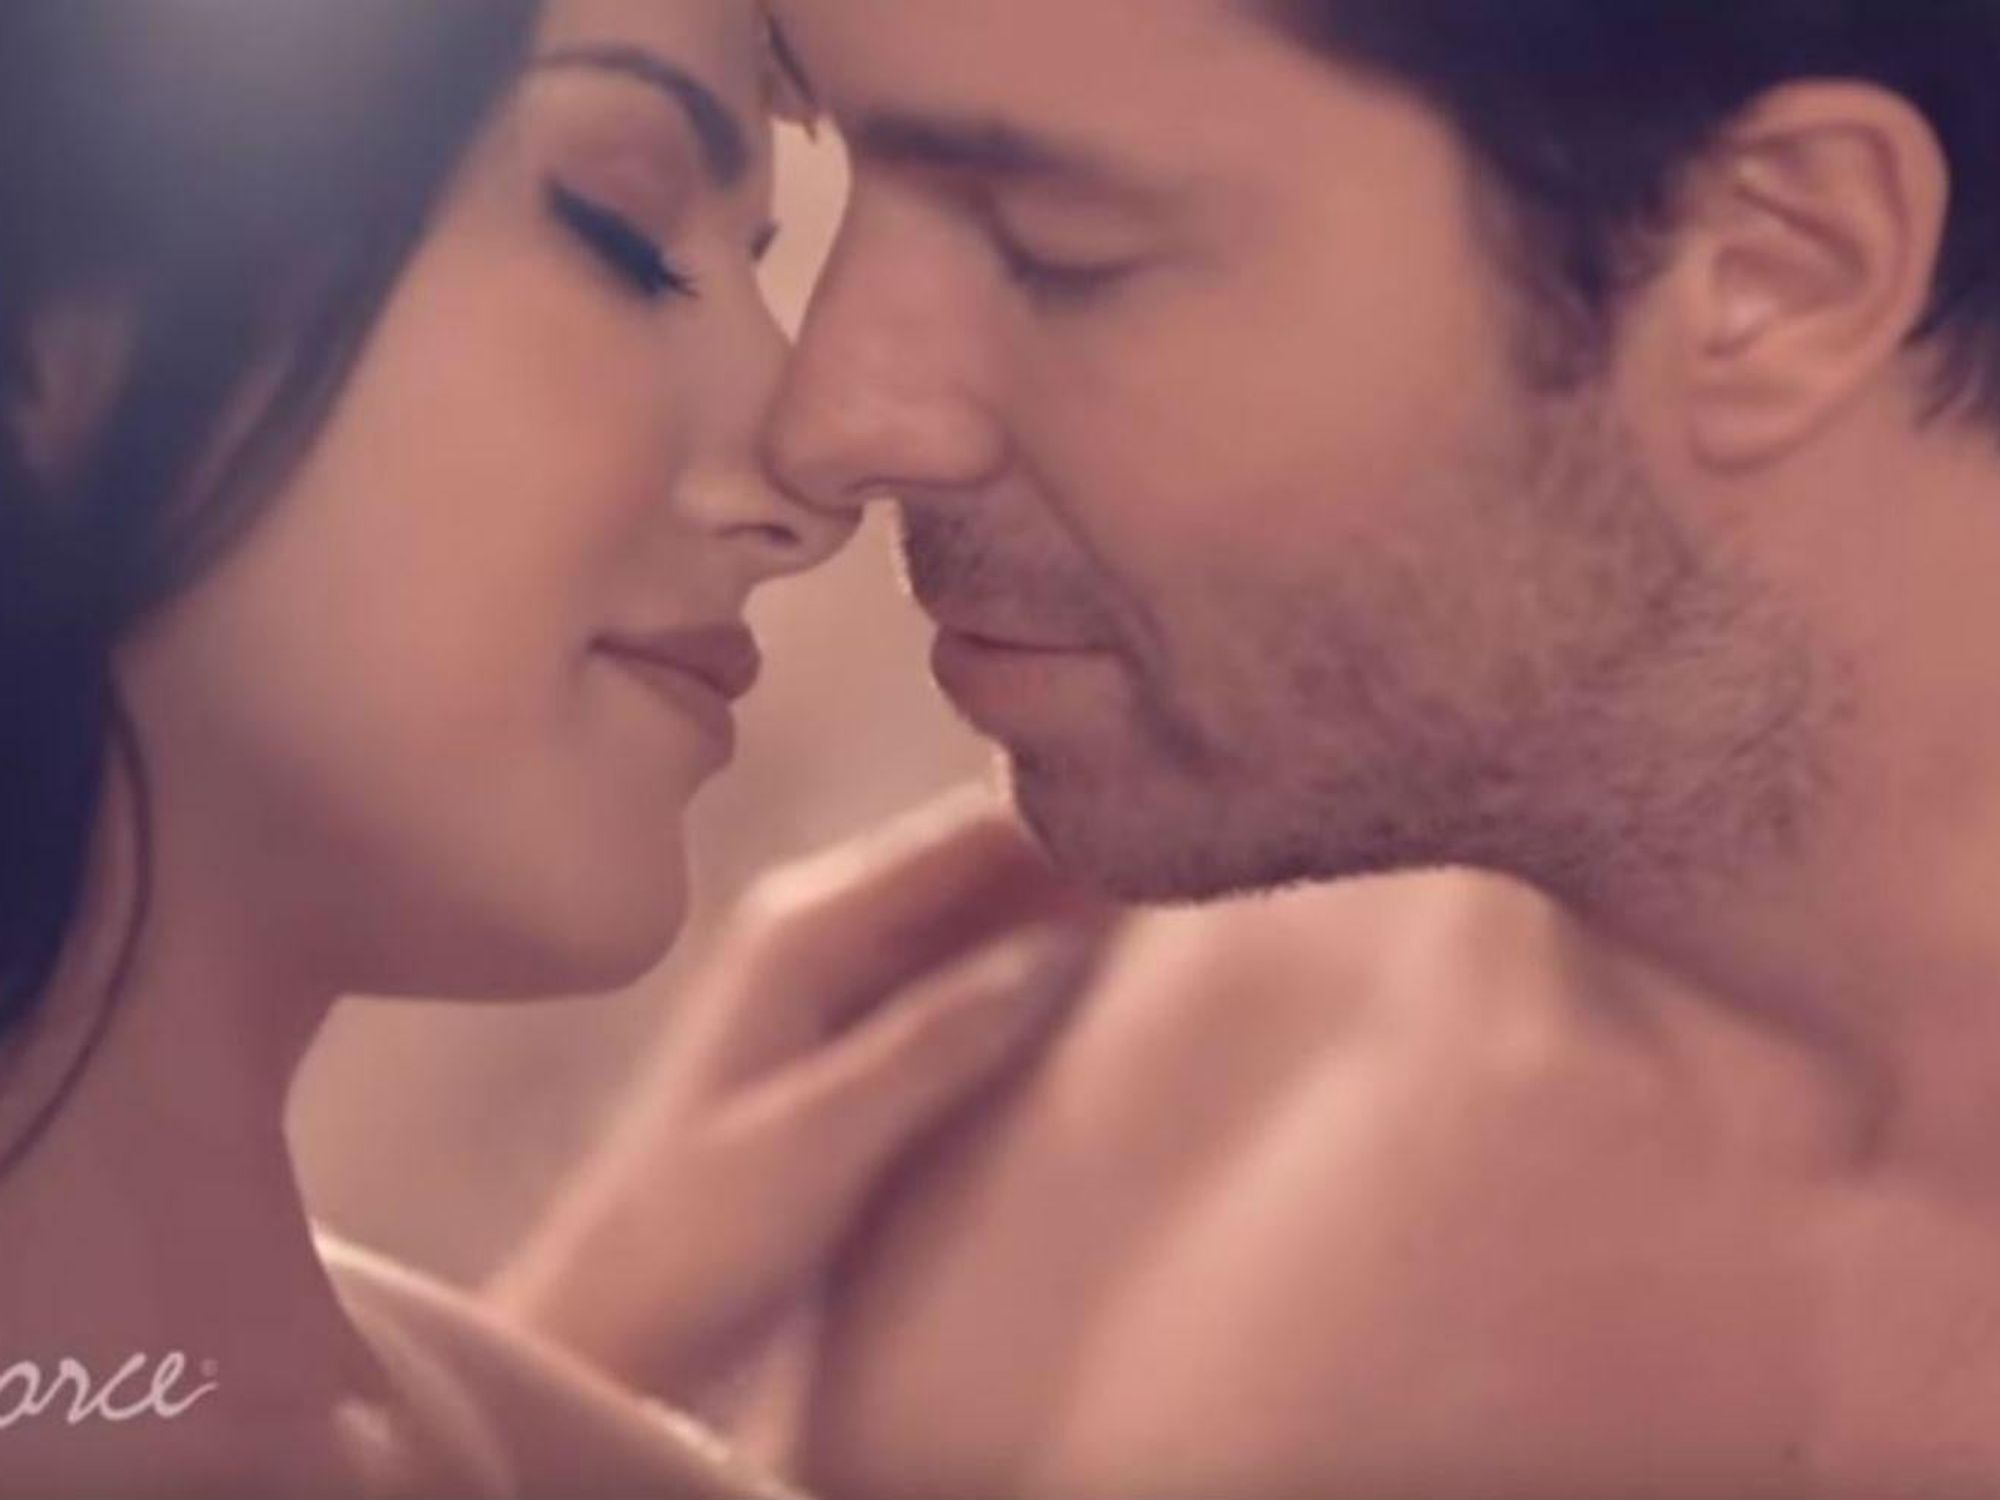 Sony Liony Sex Vidio Kondom - A condom advert featuring an ex porn star is causing fury in India |  indy100 | indy100